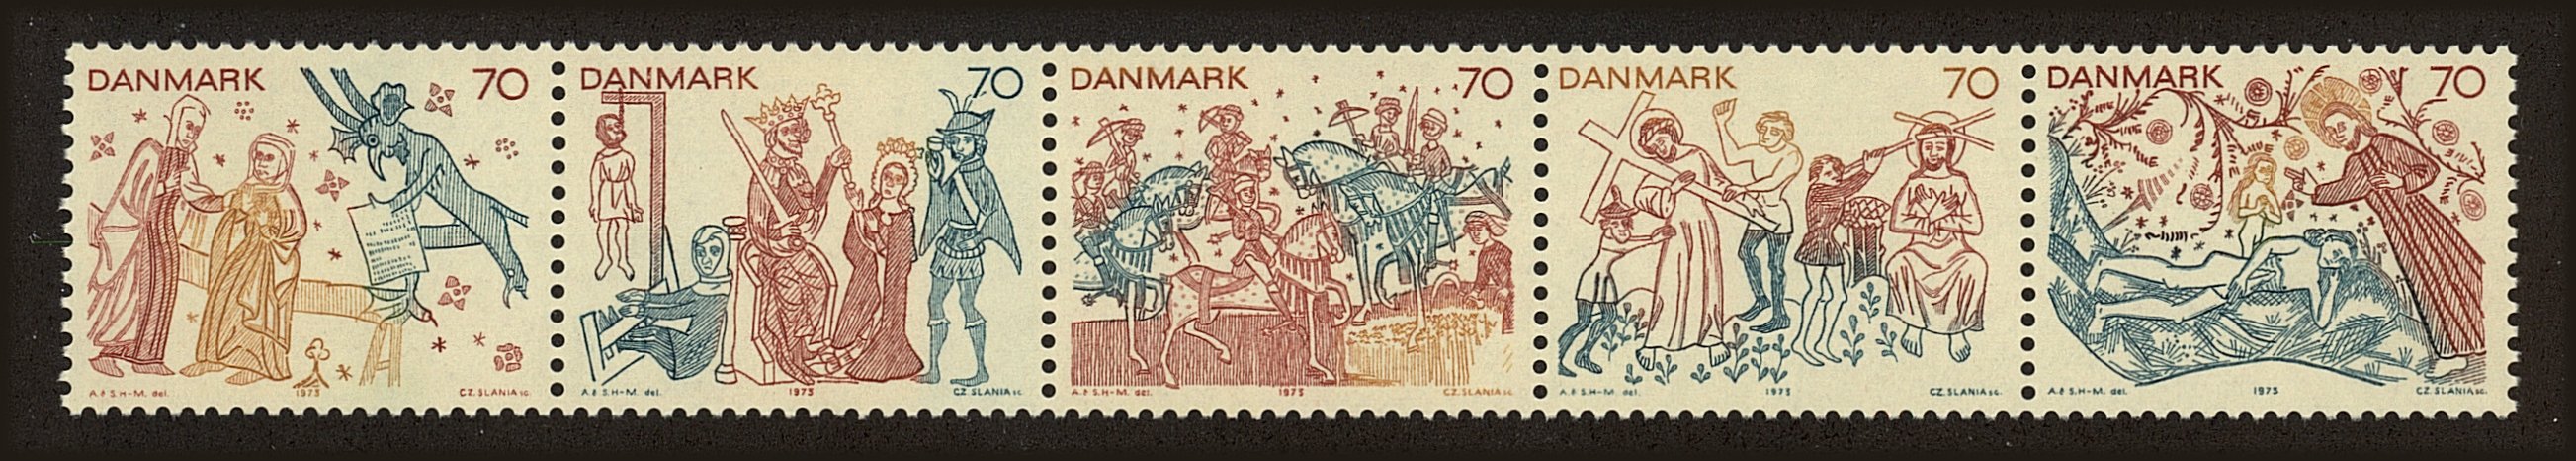 Front view of Denmark 530b collectors stamp